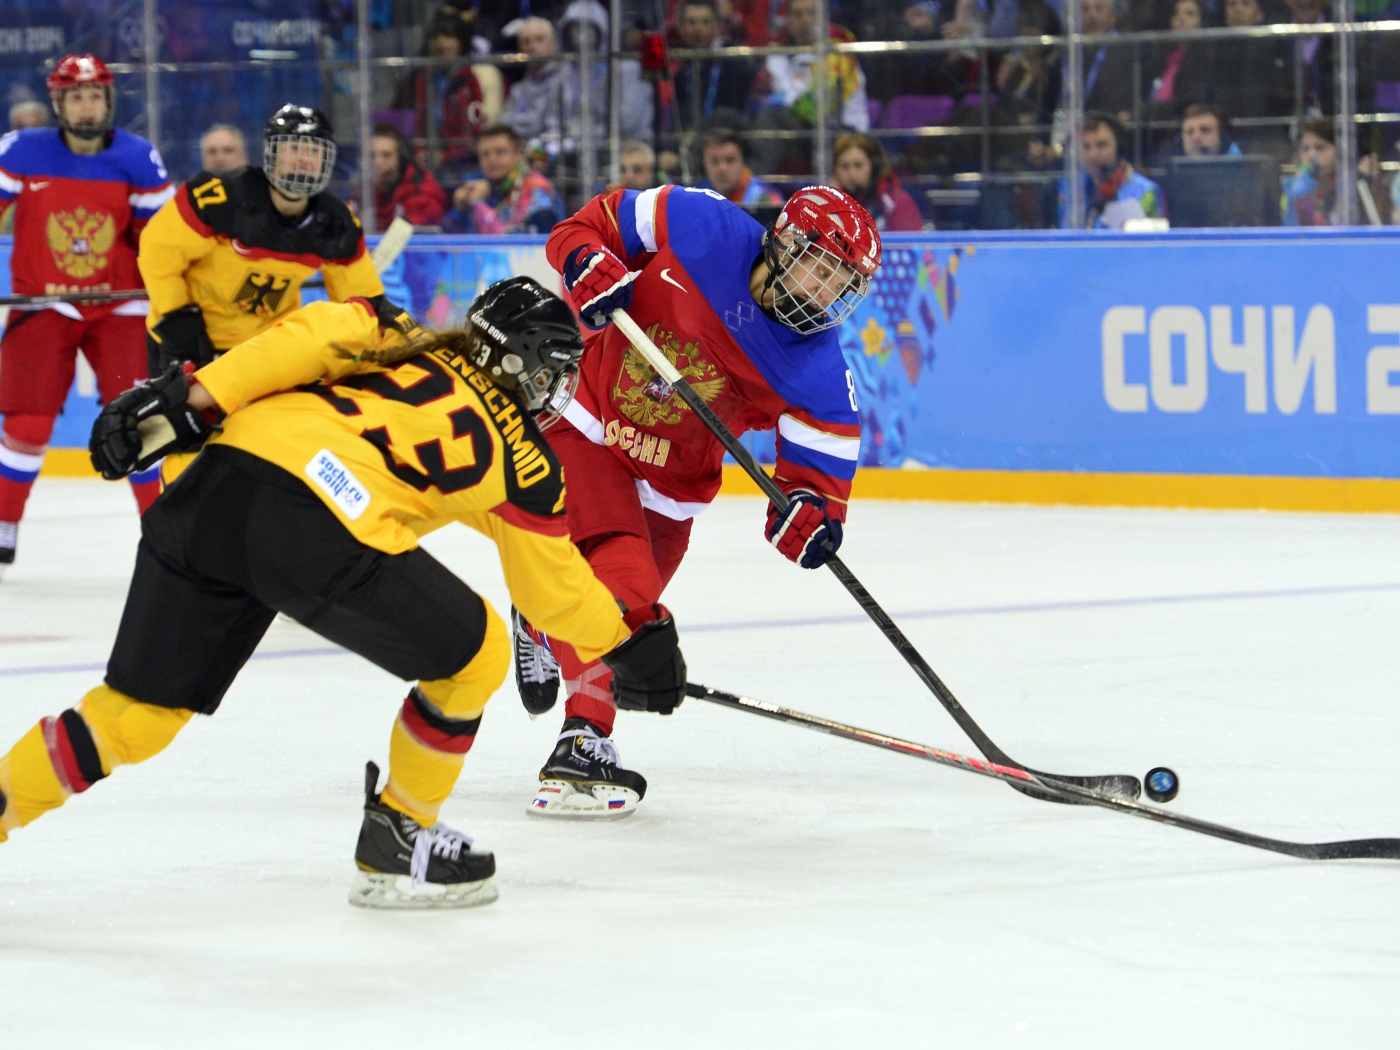 Fighting for the puck in ice hockey at the Olympic Games in Sochi